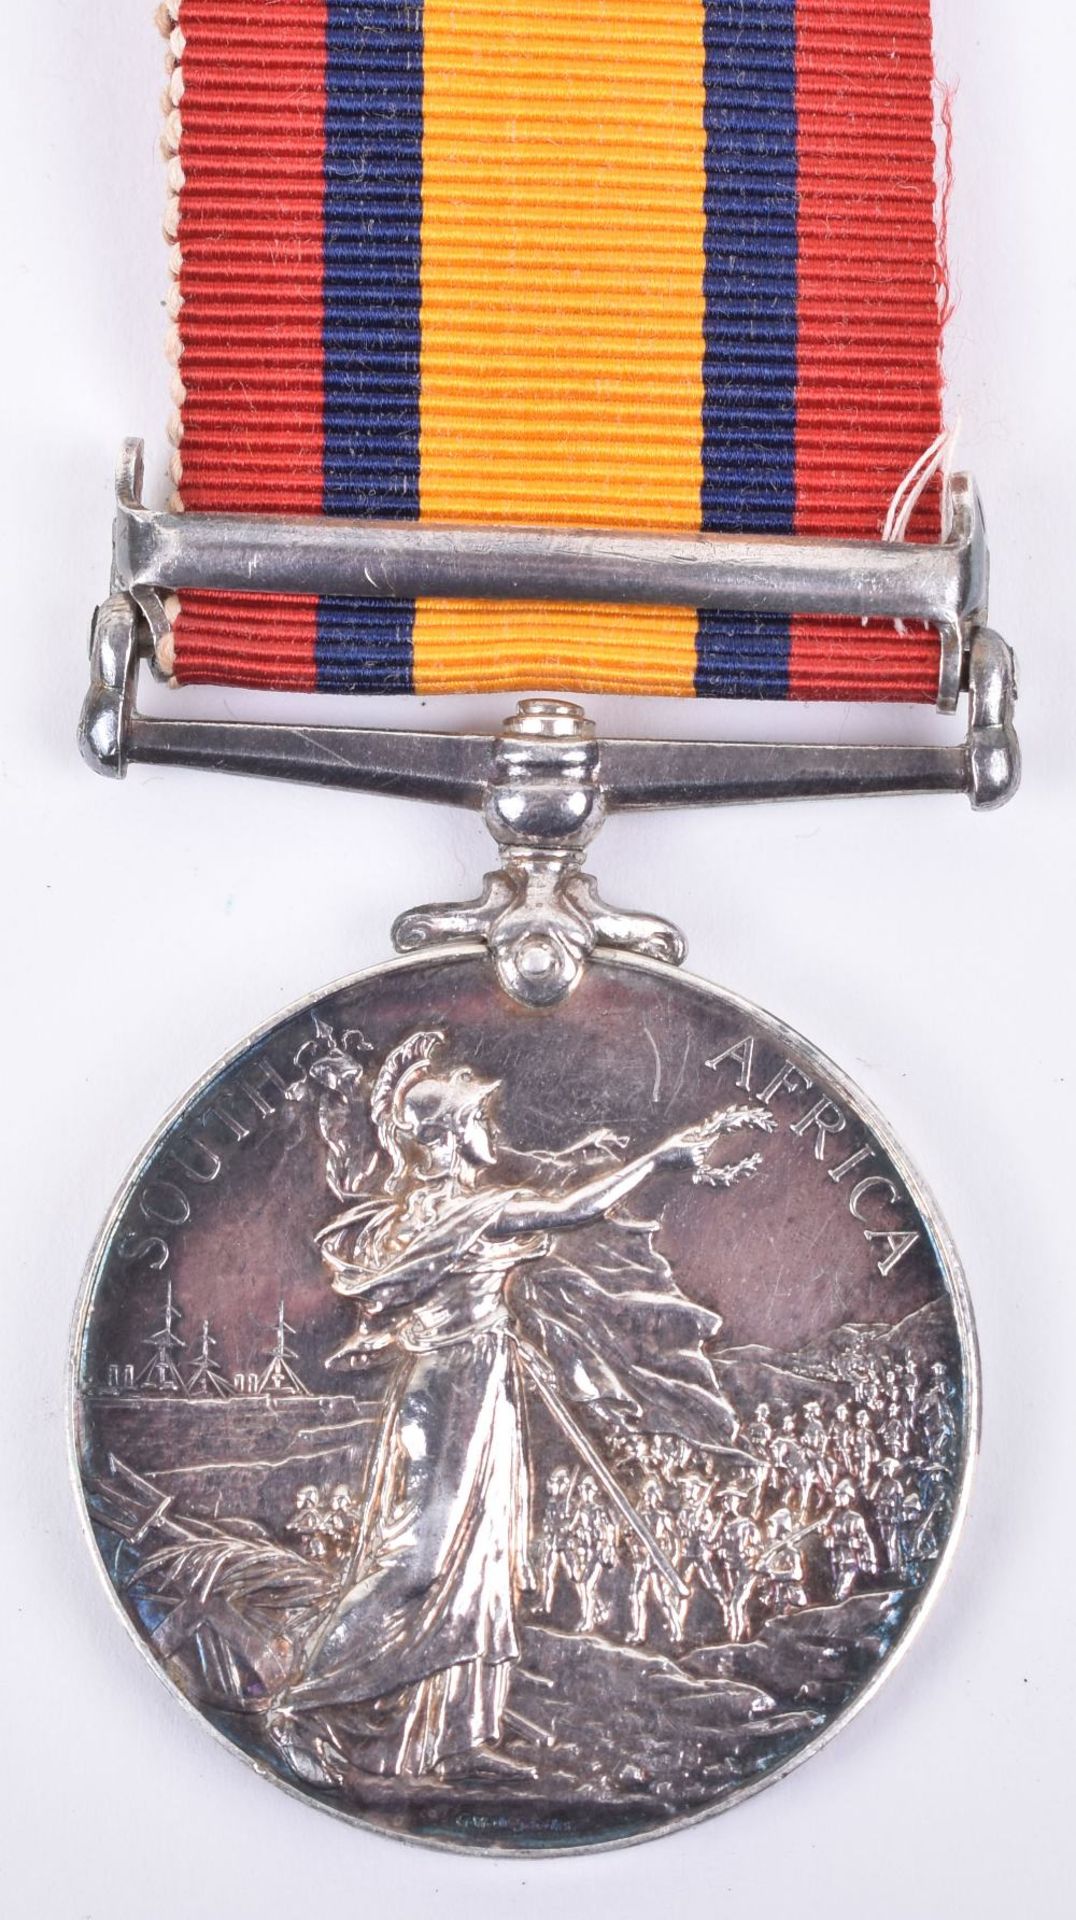 Queens South Africa Medal Transkei Mounted Rifles - Image 4 of 4